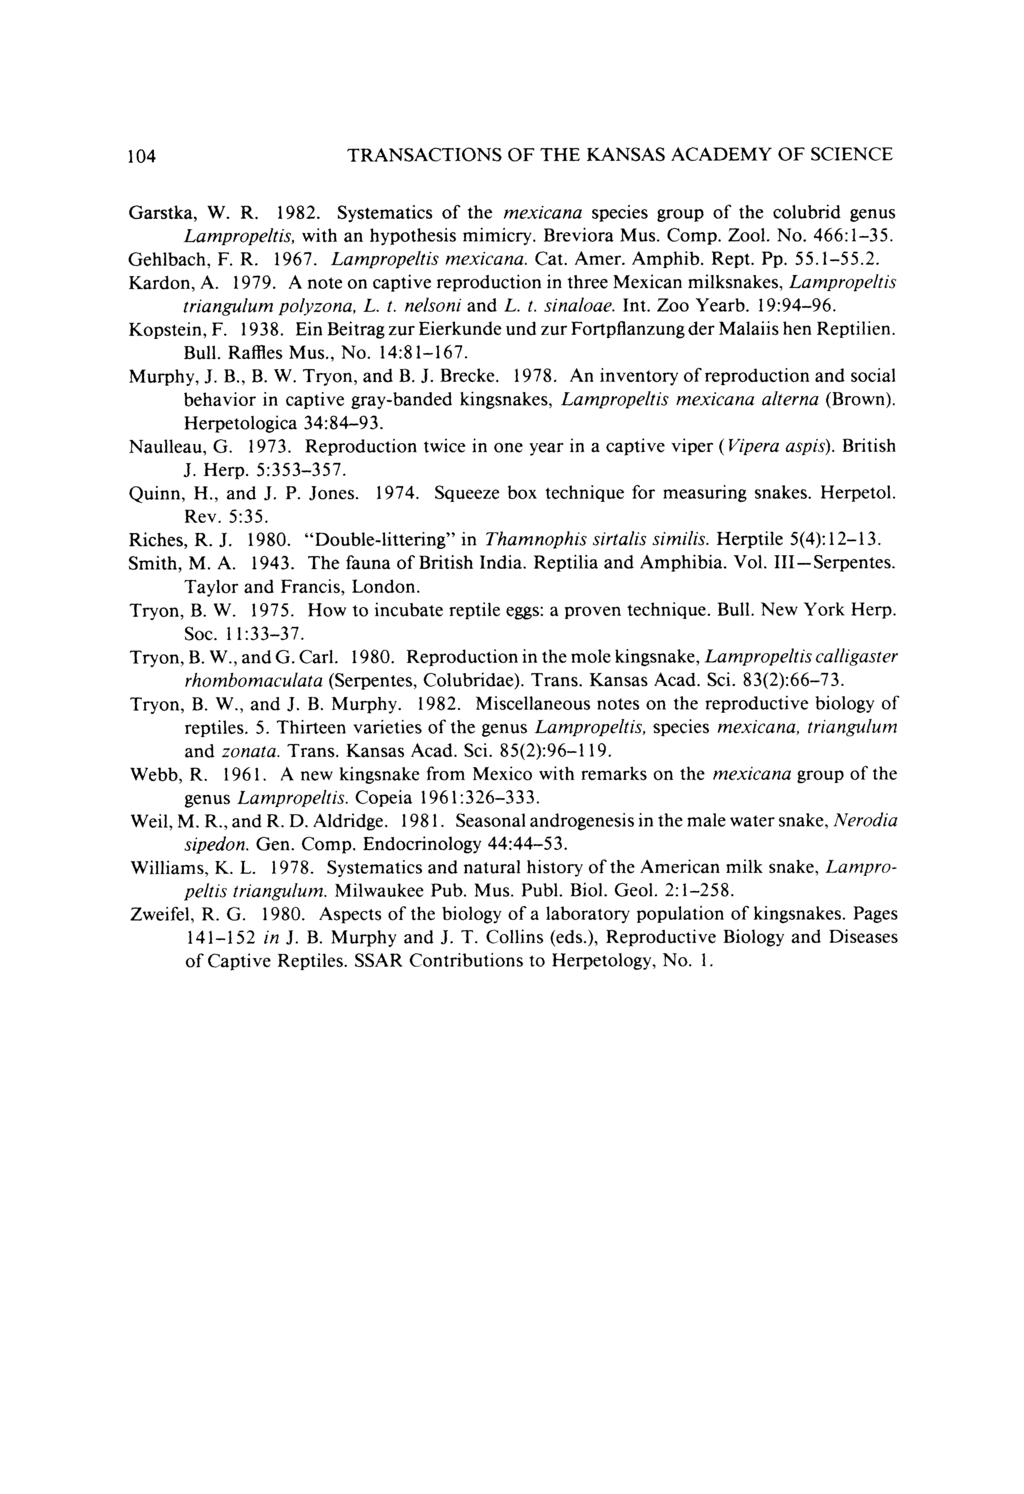 104 TRANSACTIONS OF THE KANSAS ACADEMY OF SCIENCE Garstka, W. R. 1982. Systematics of the mexicana species group of the colubrid genus Lampropeltis, with an hypothesis mimicry. Breviora Mus. Comp.